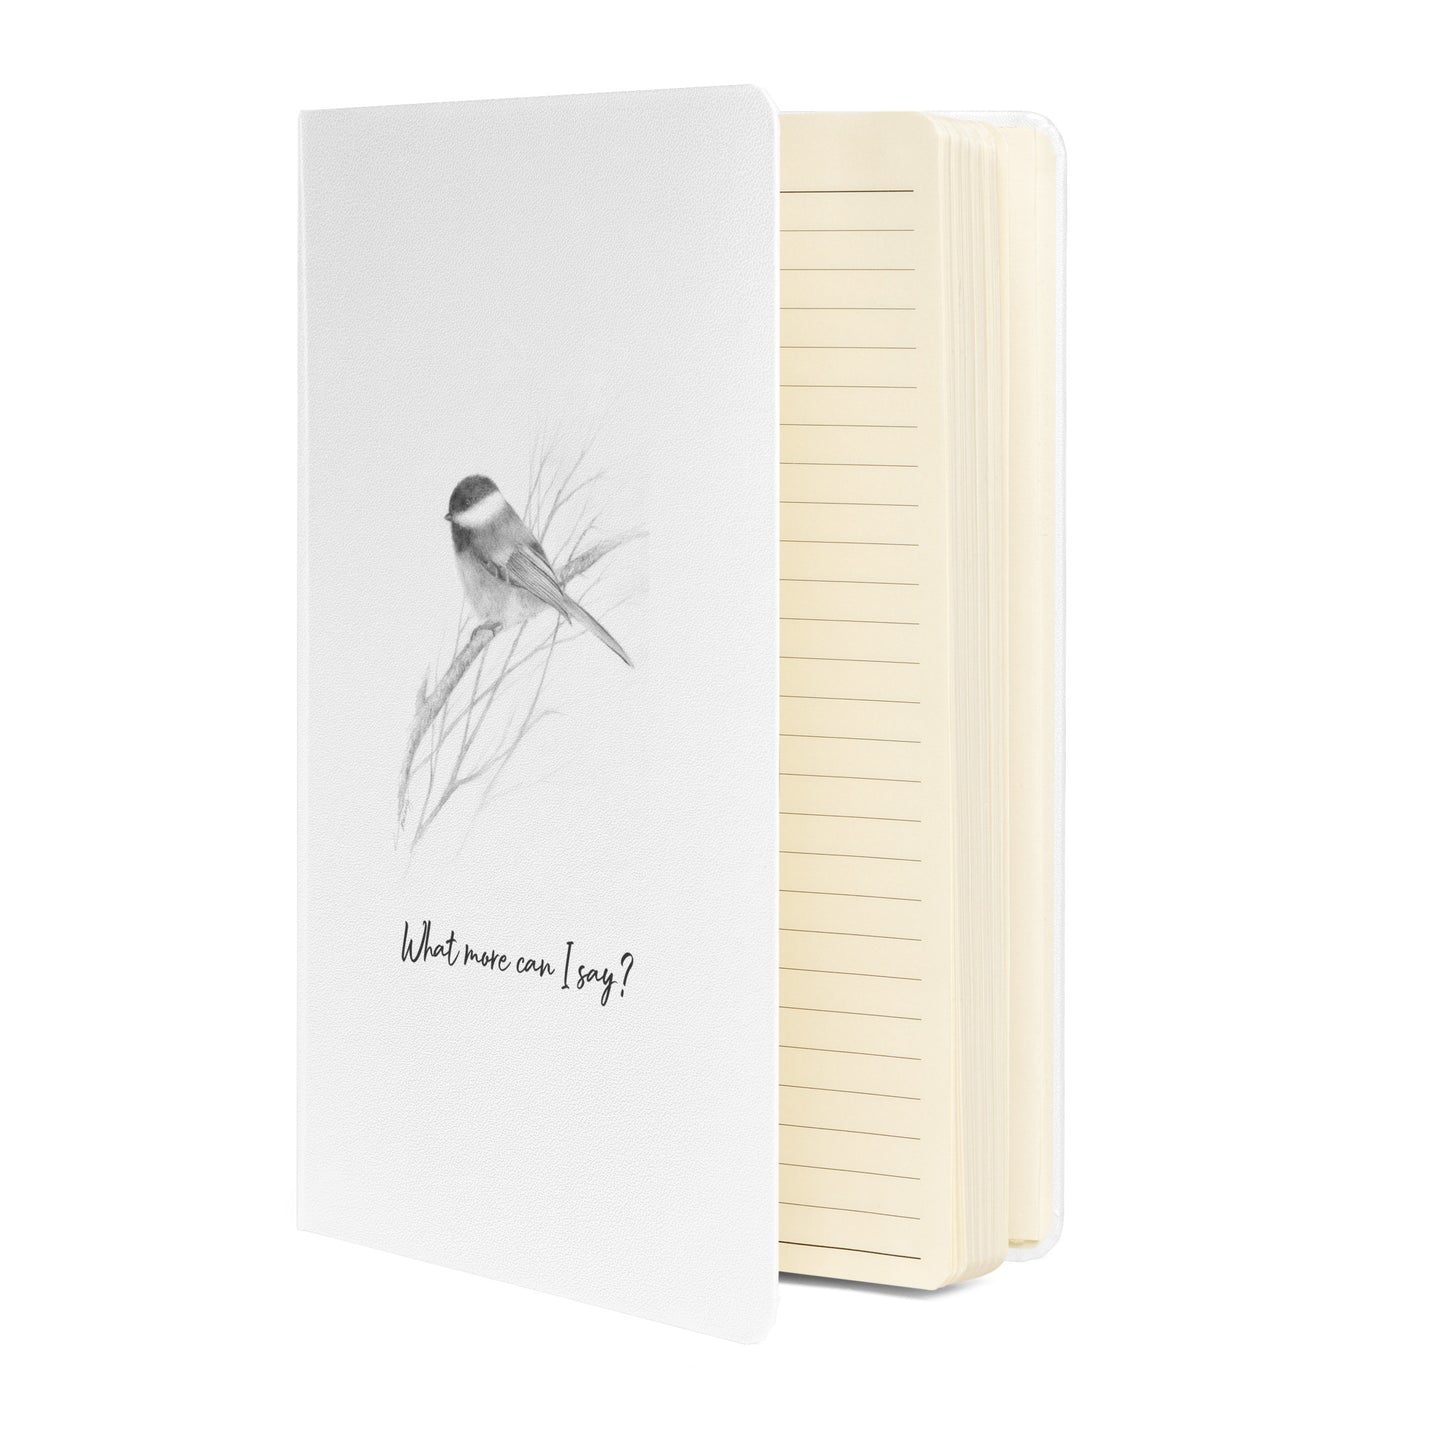 "What more can I say?" Hardcover bound notebook